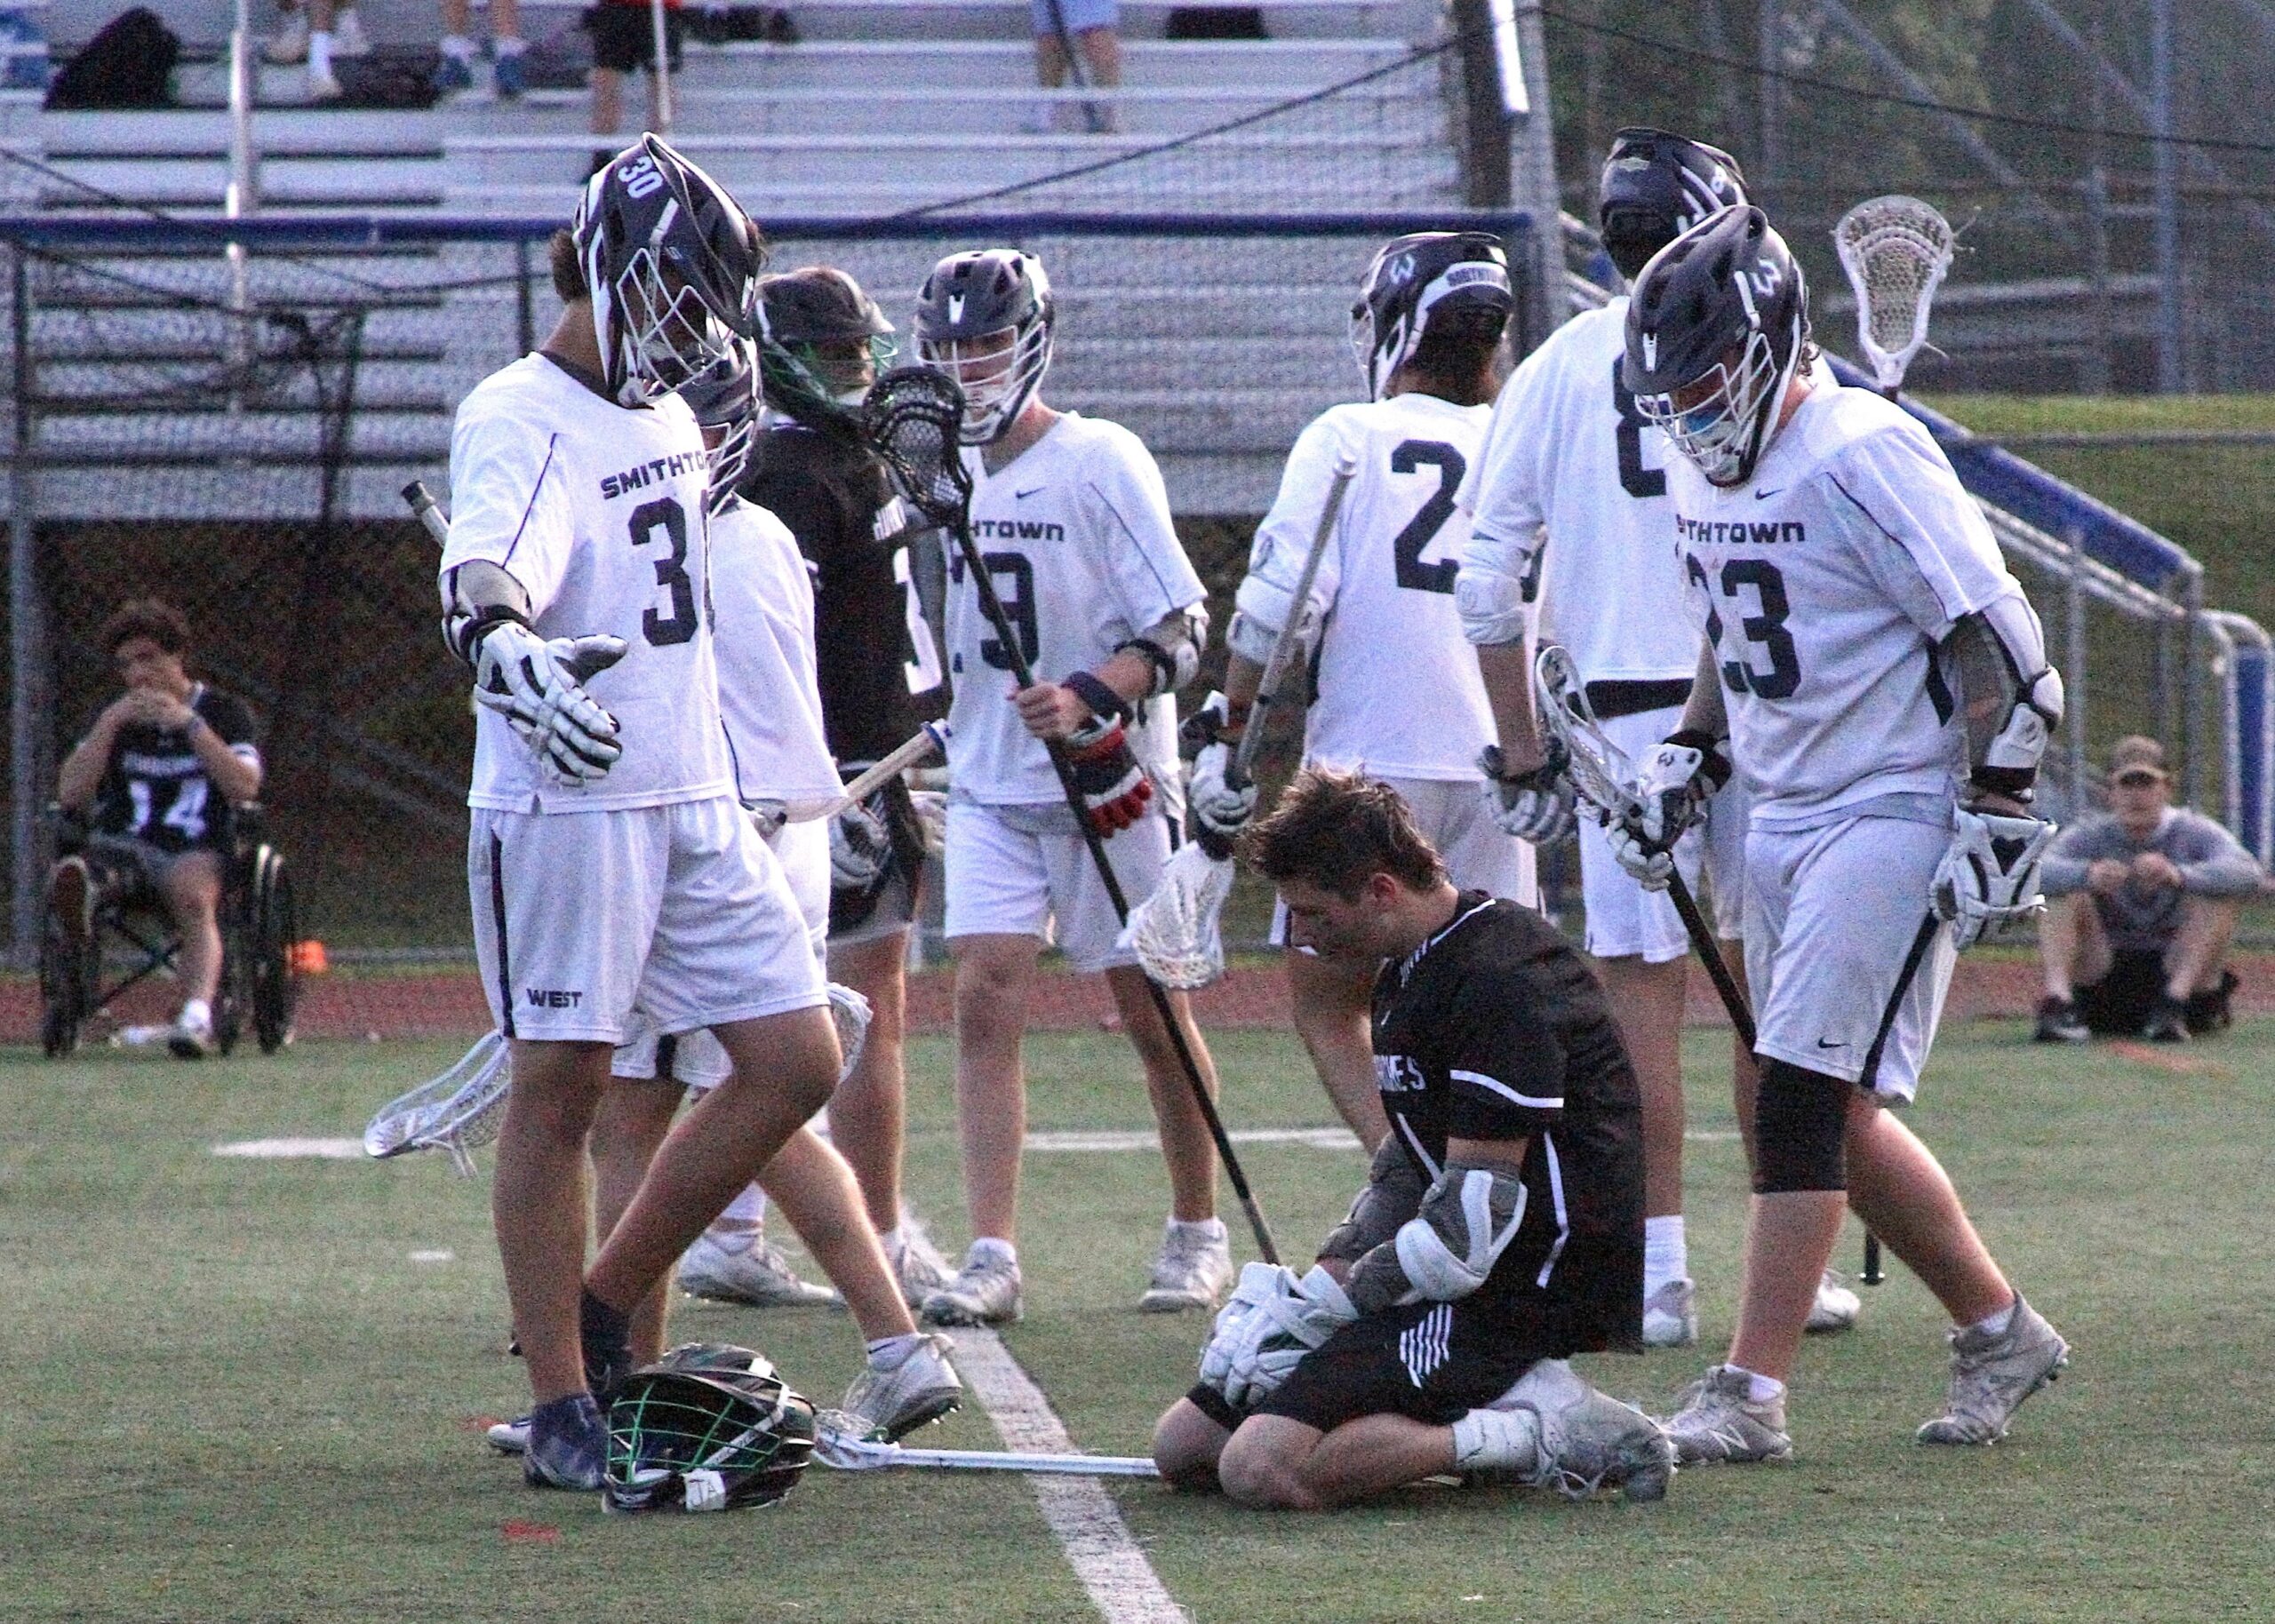 Senior attack Gavin Arcuri is helped up and congratulated by his opponents following his team's loss. DESIRÉE KEEGAN